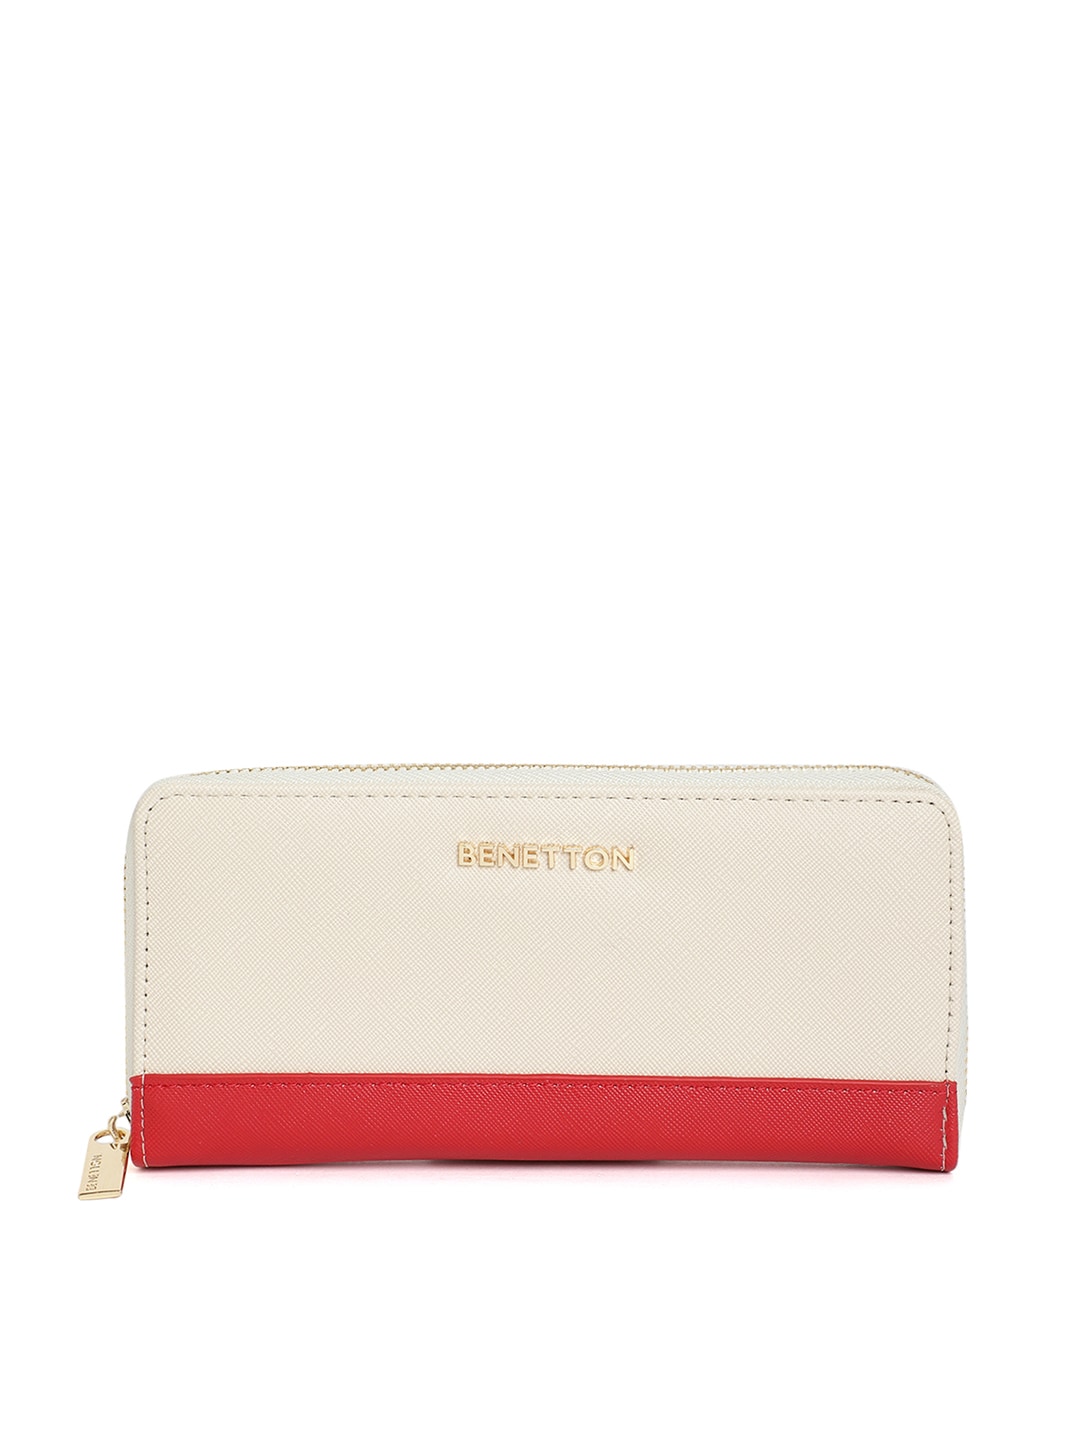 United Colors of Benetton Women Off White & Red Colourblocked Synthetic Leather Zip Around Wallet Price in India